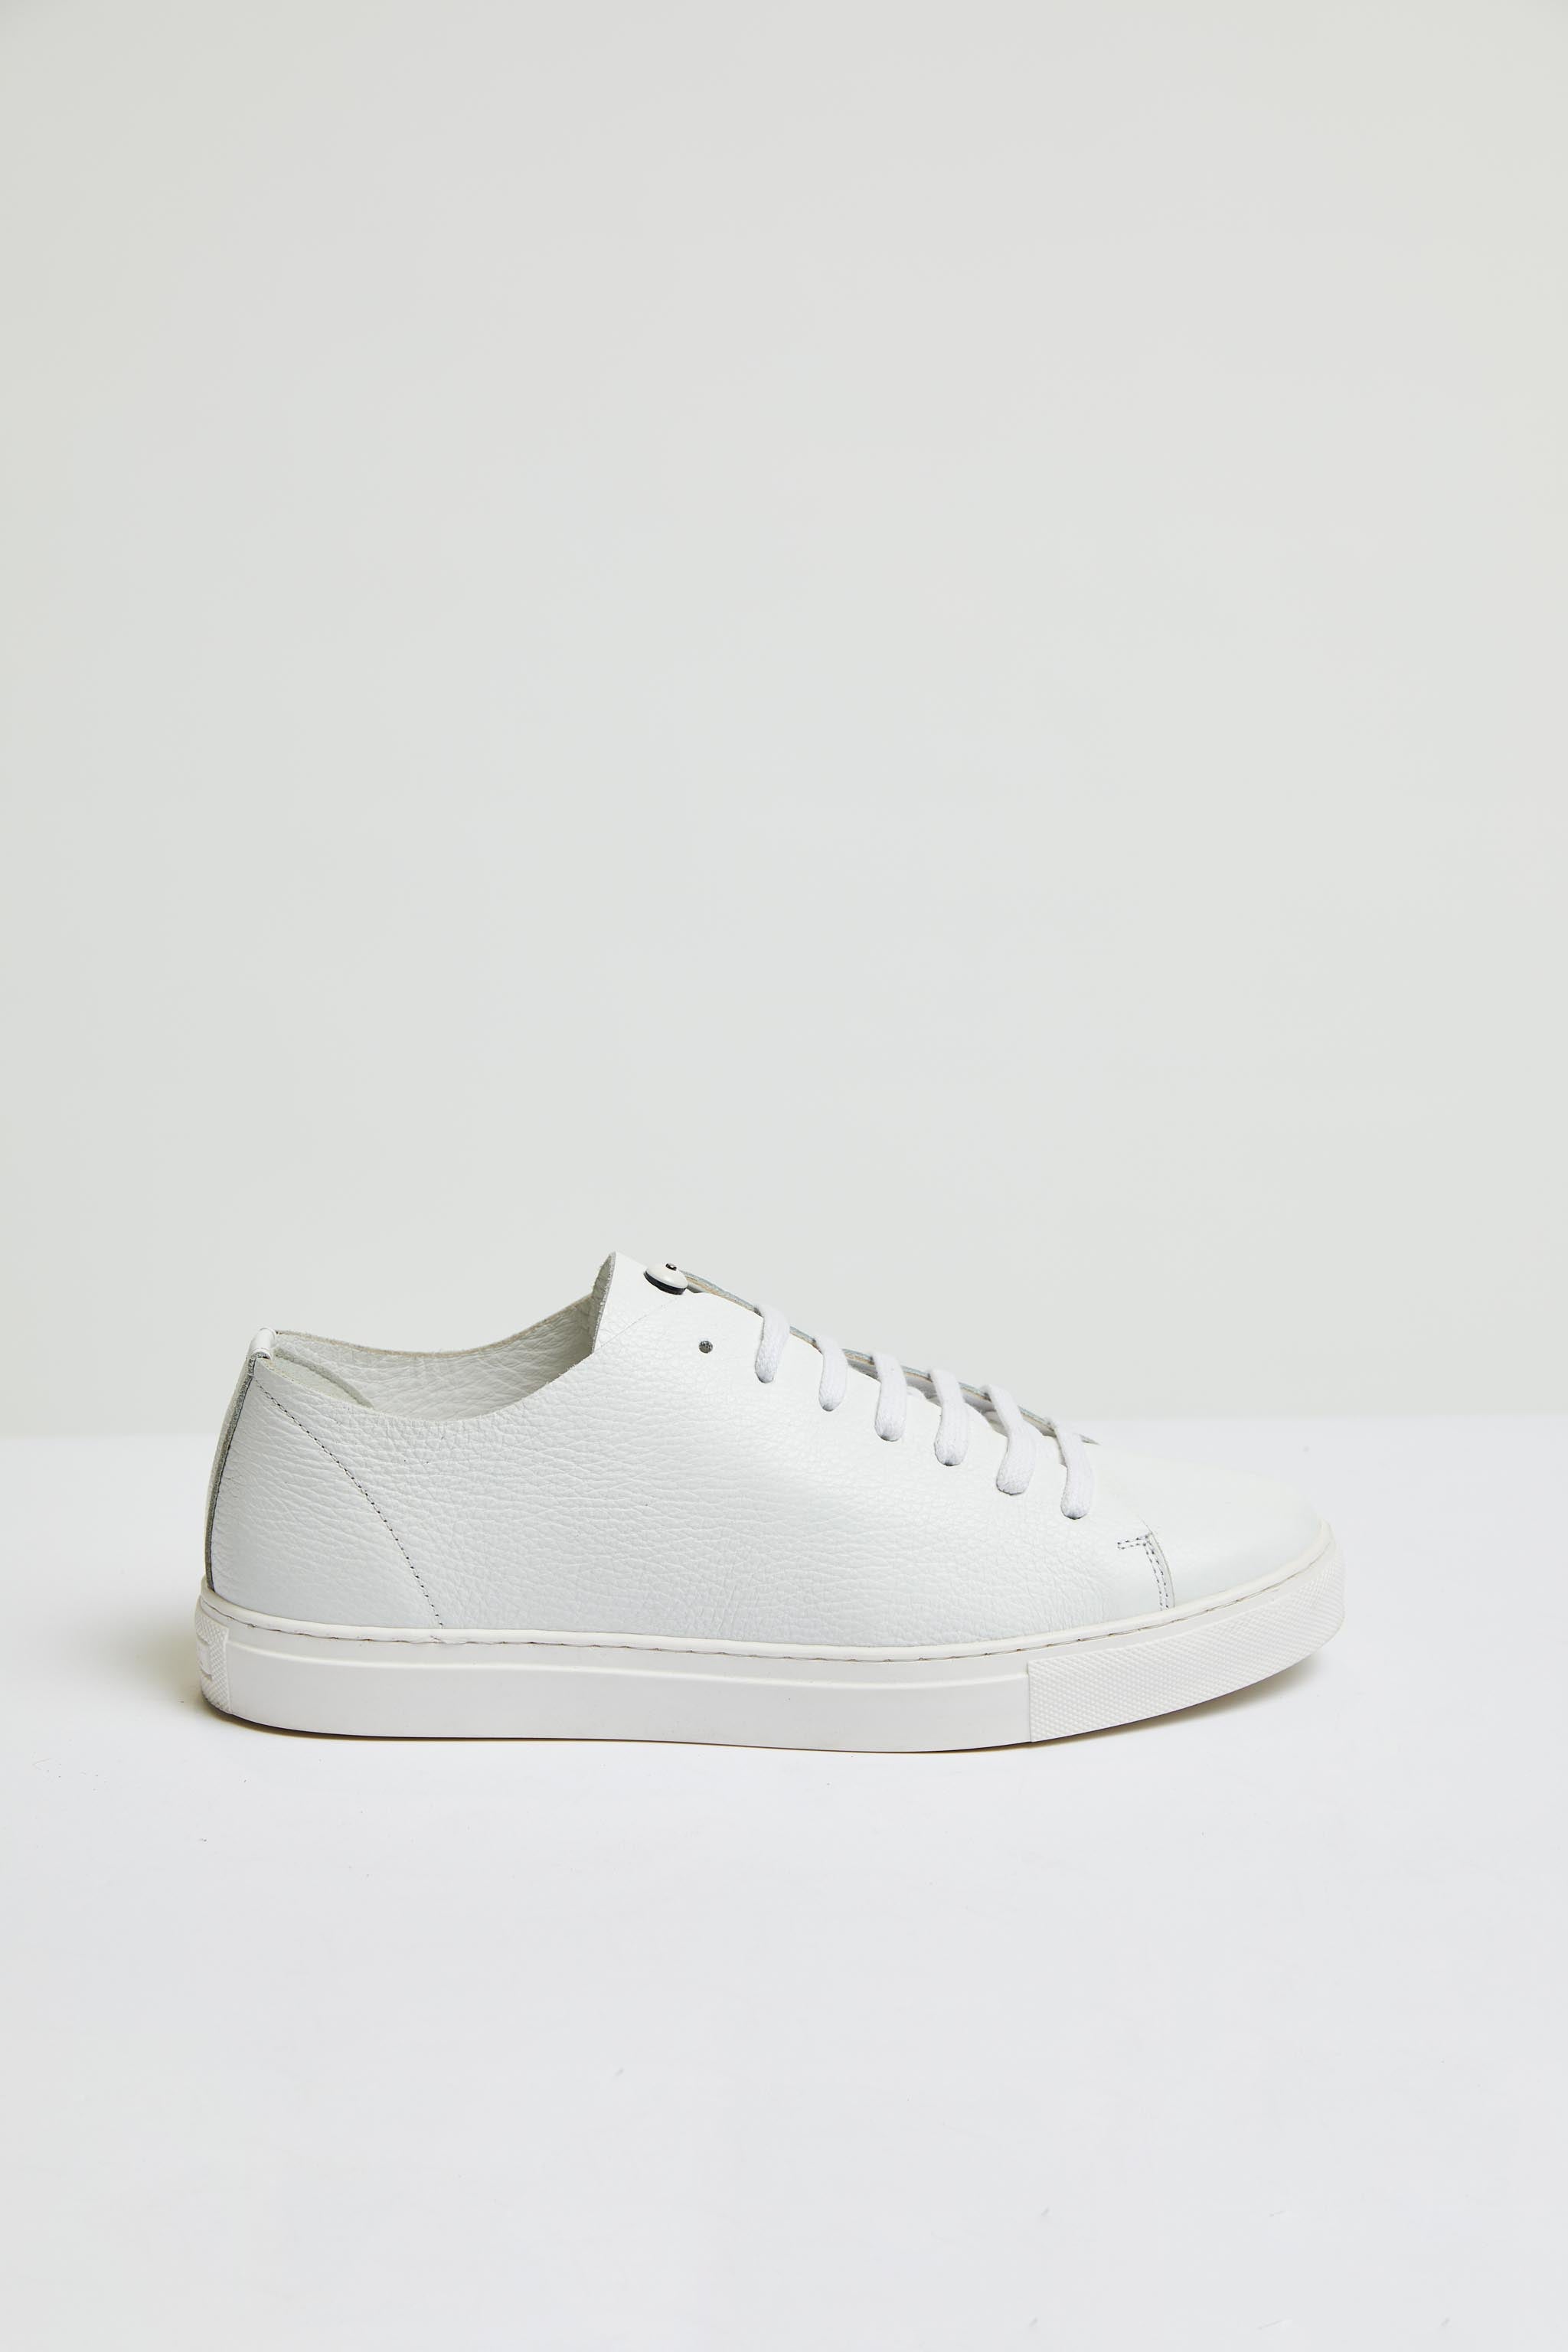 Textured leather sneaker in white